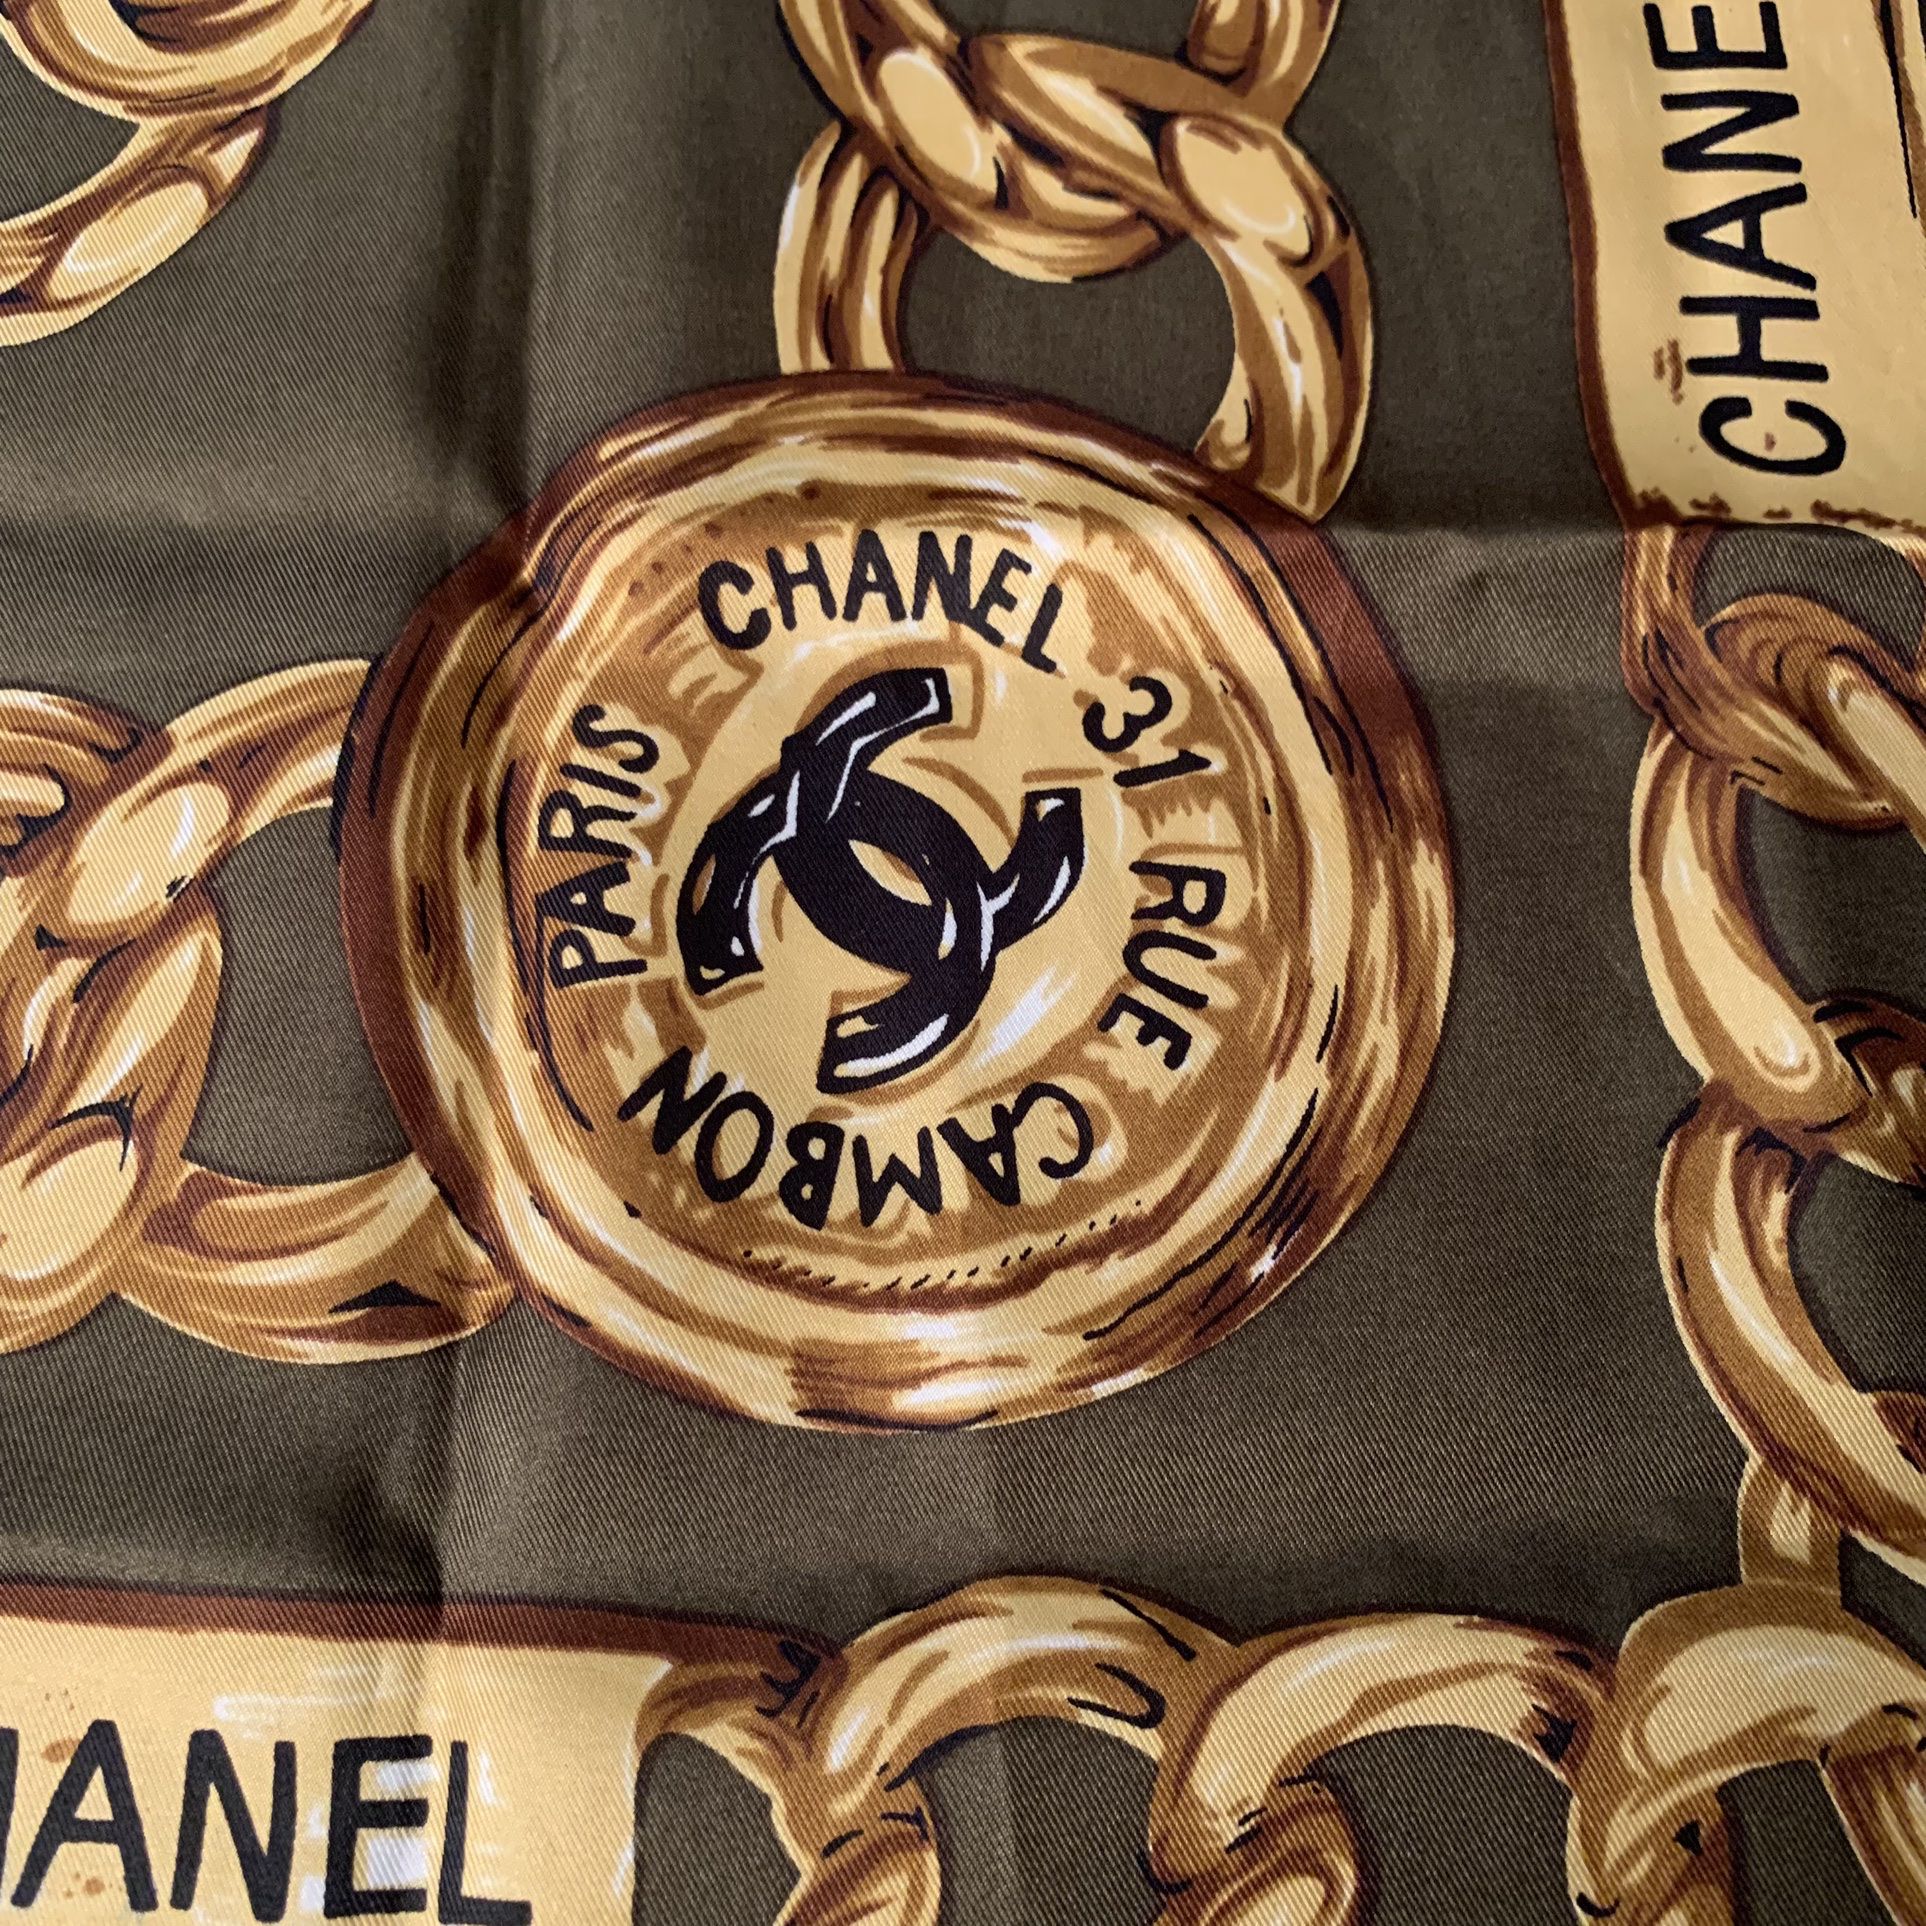 CHANEL Scarf Paris 31 Rue Cambon 33” Square for Sale in Long Beach,  California - OfferUp